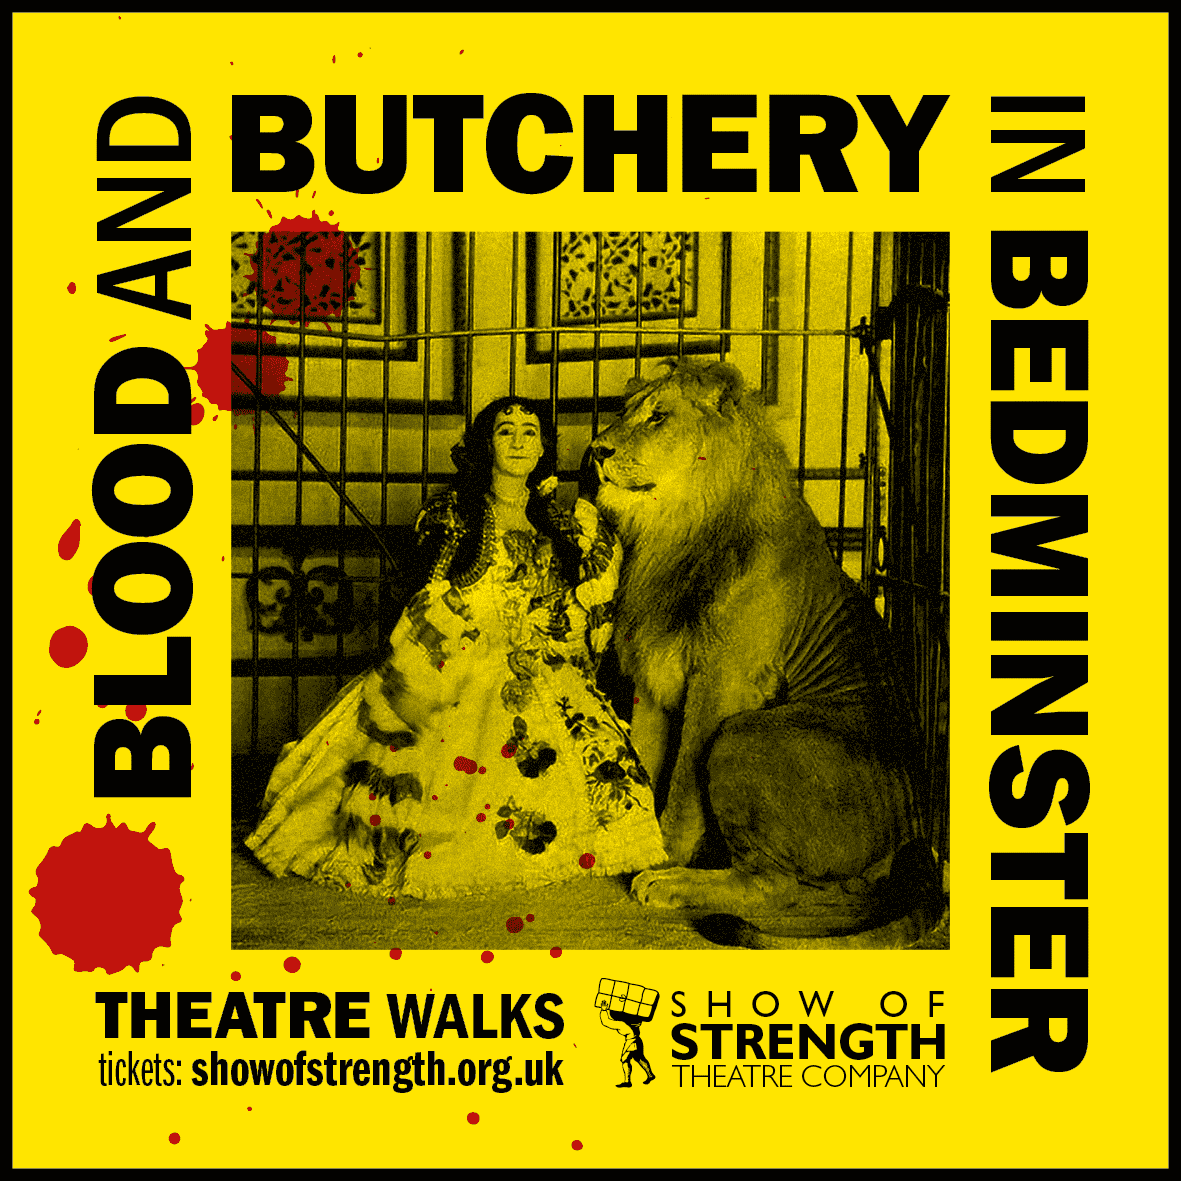 Blood and Butchery in Bedminster.